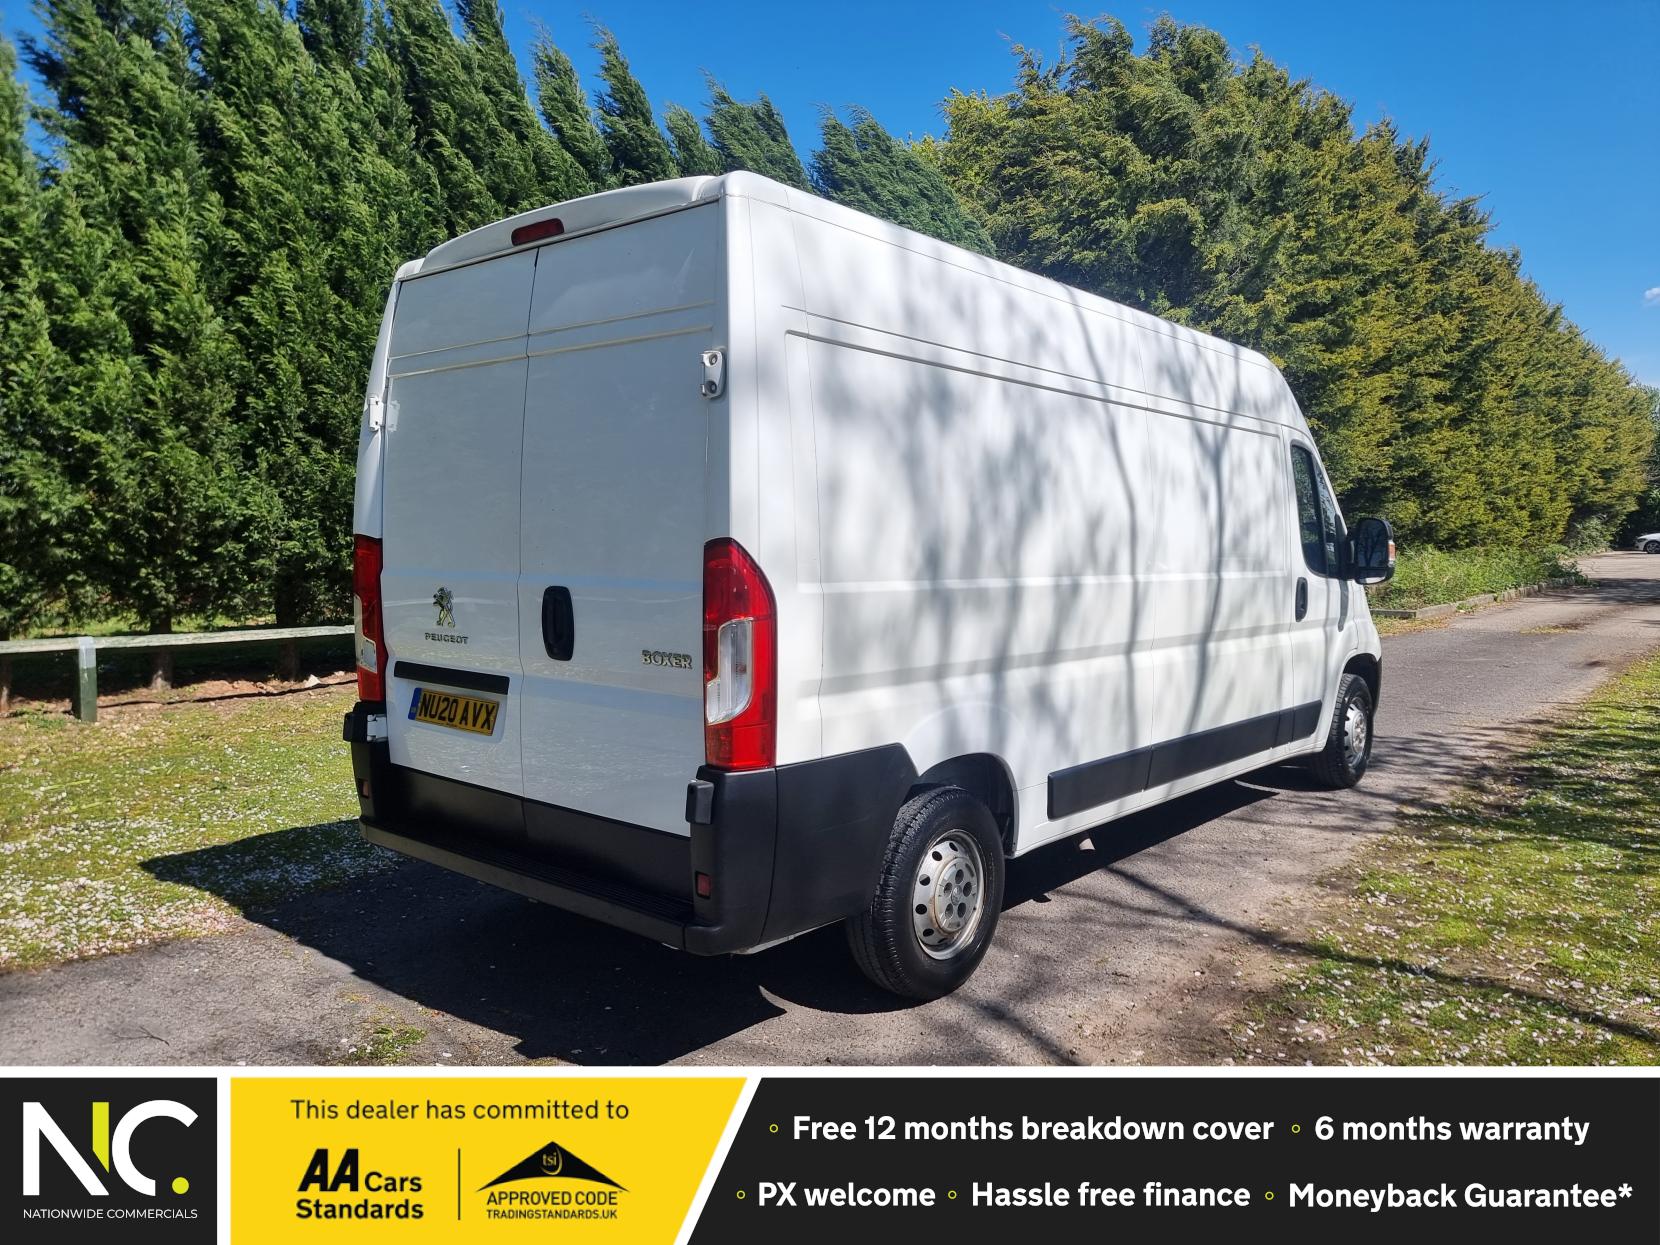 Peugeot Boxer 2.2 BlueHDi L3 H2 Panel Van - (140 ps) 335 Diesel Manual (s/s) ⭐️ Euro 6 ⭐️  One Owner ⭐️  Finance Available